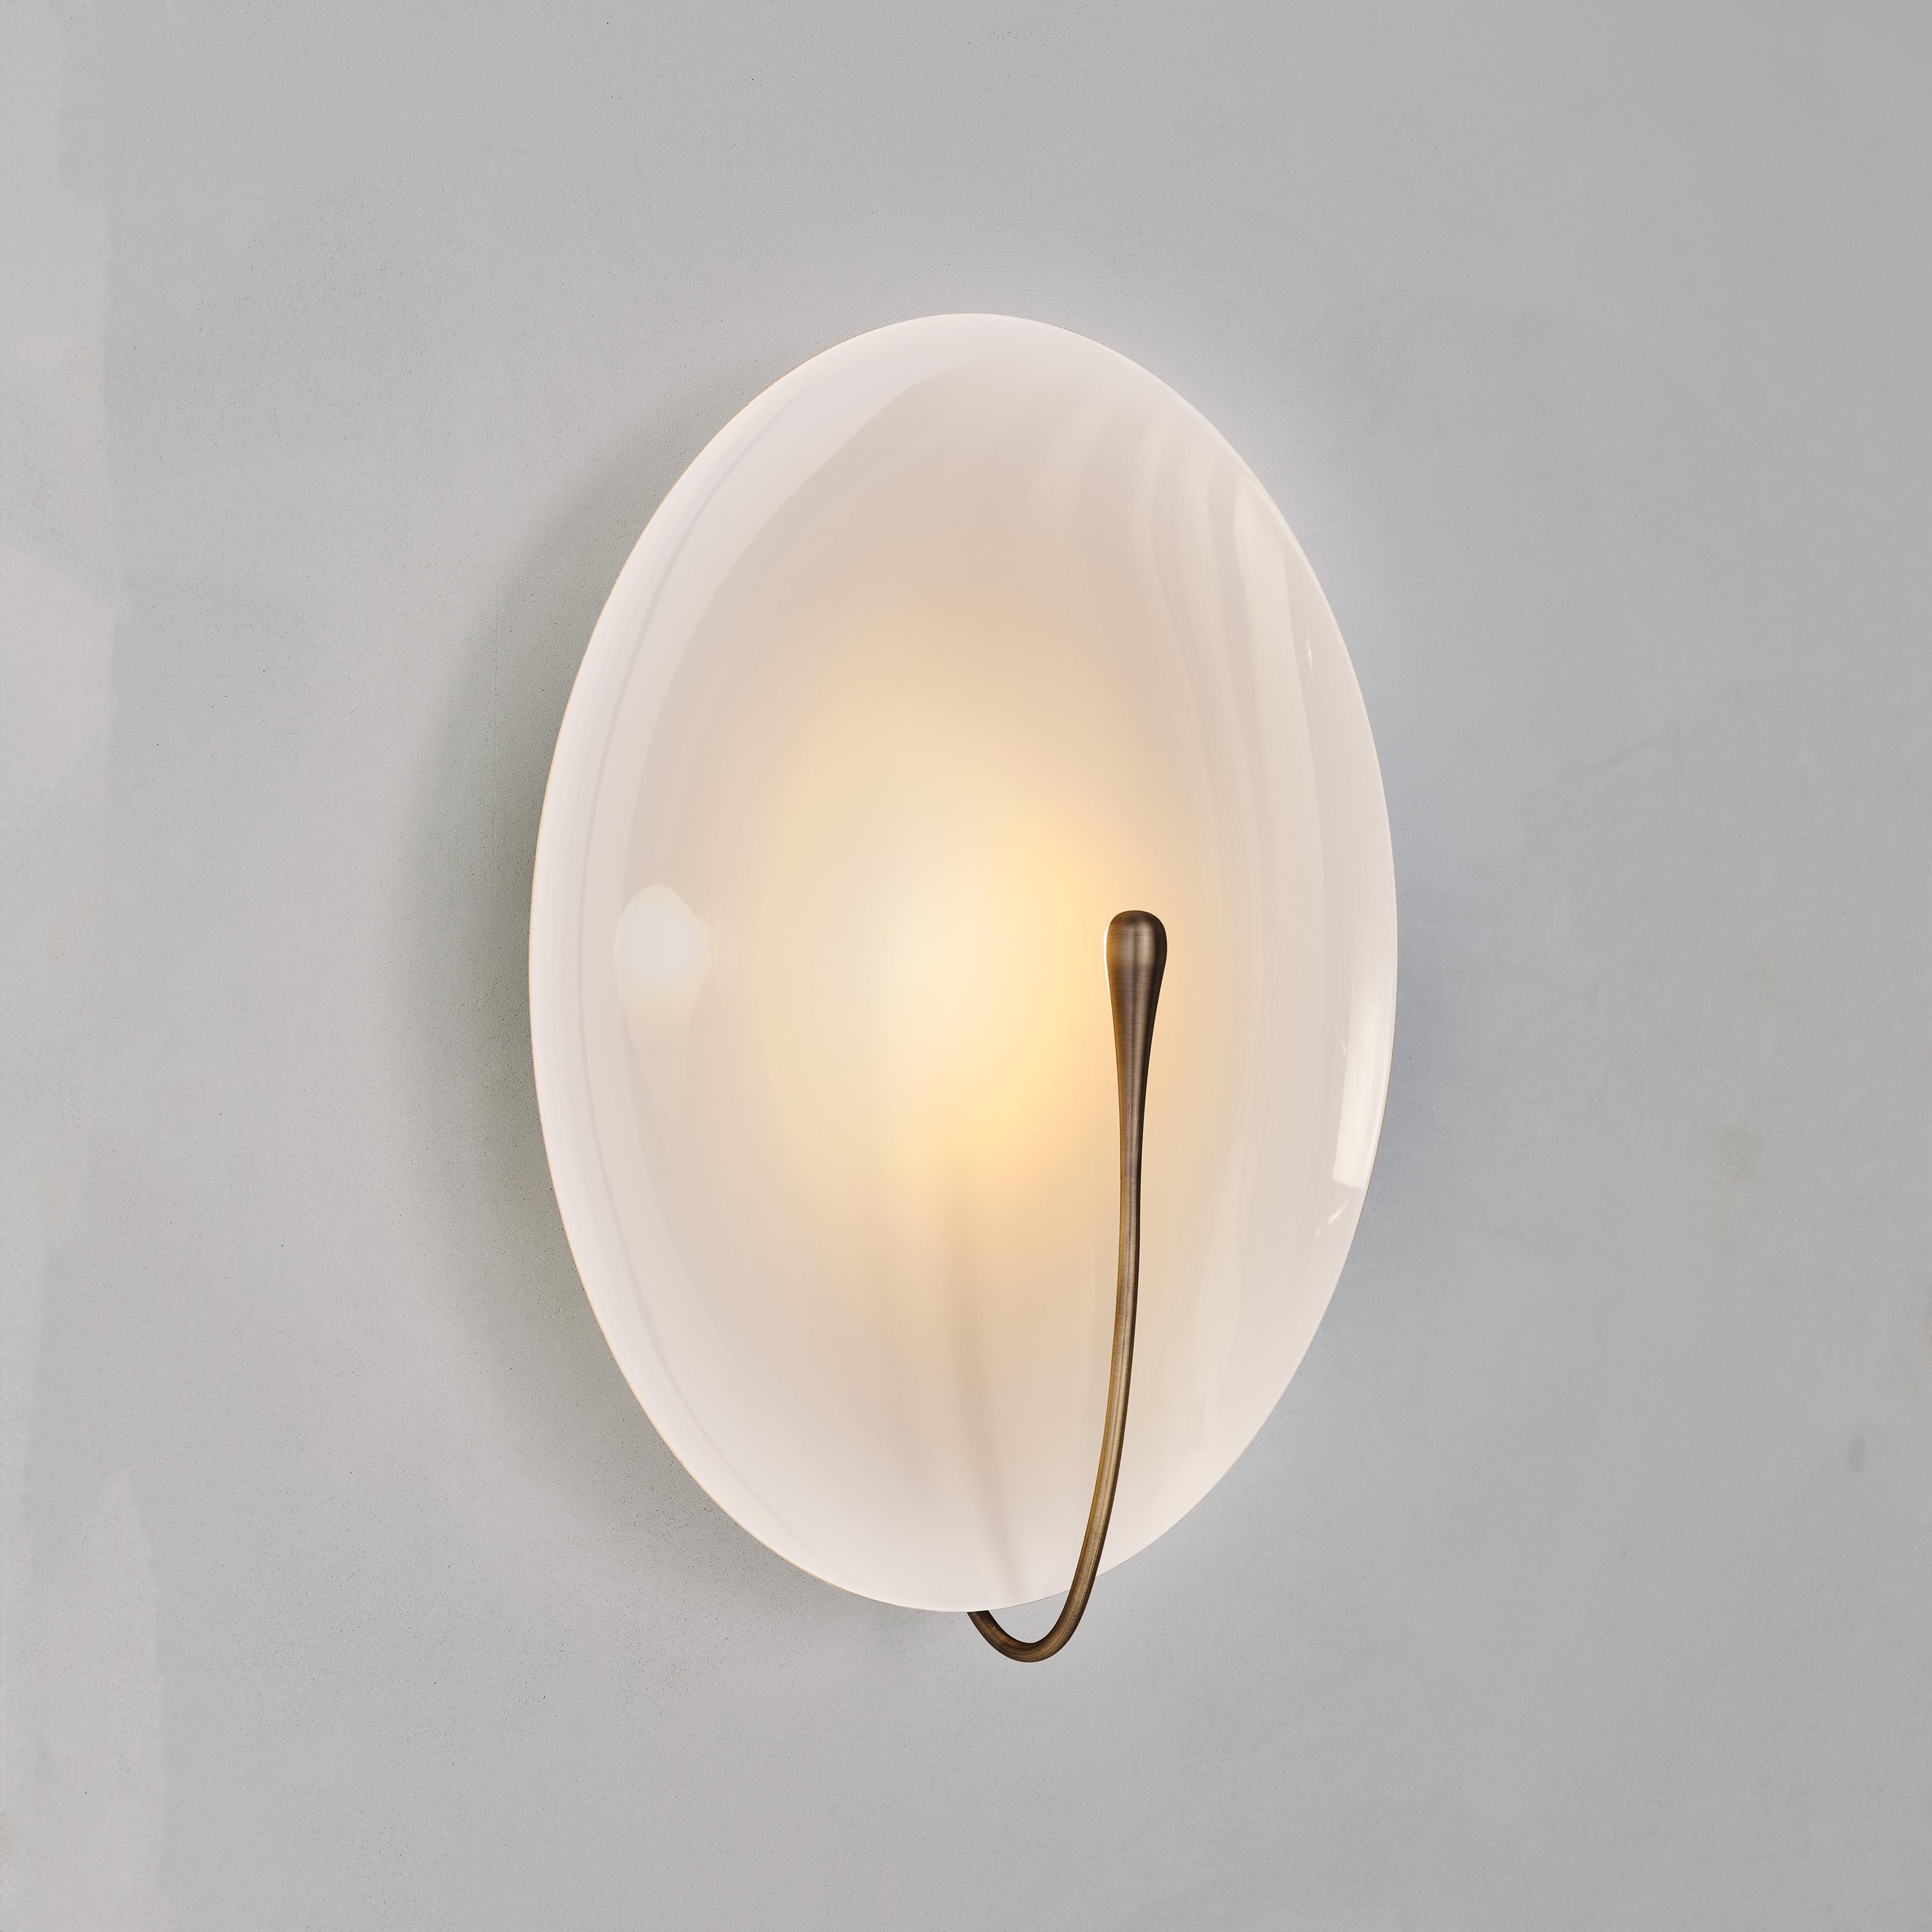 British 'Cosmic Purion XL' Handmade Patinated Brass Contemporary Wall Light Sconce For Sale